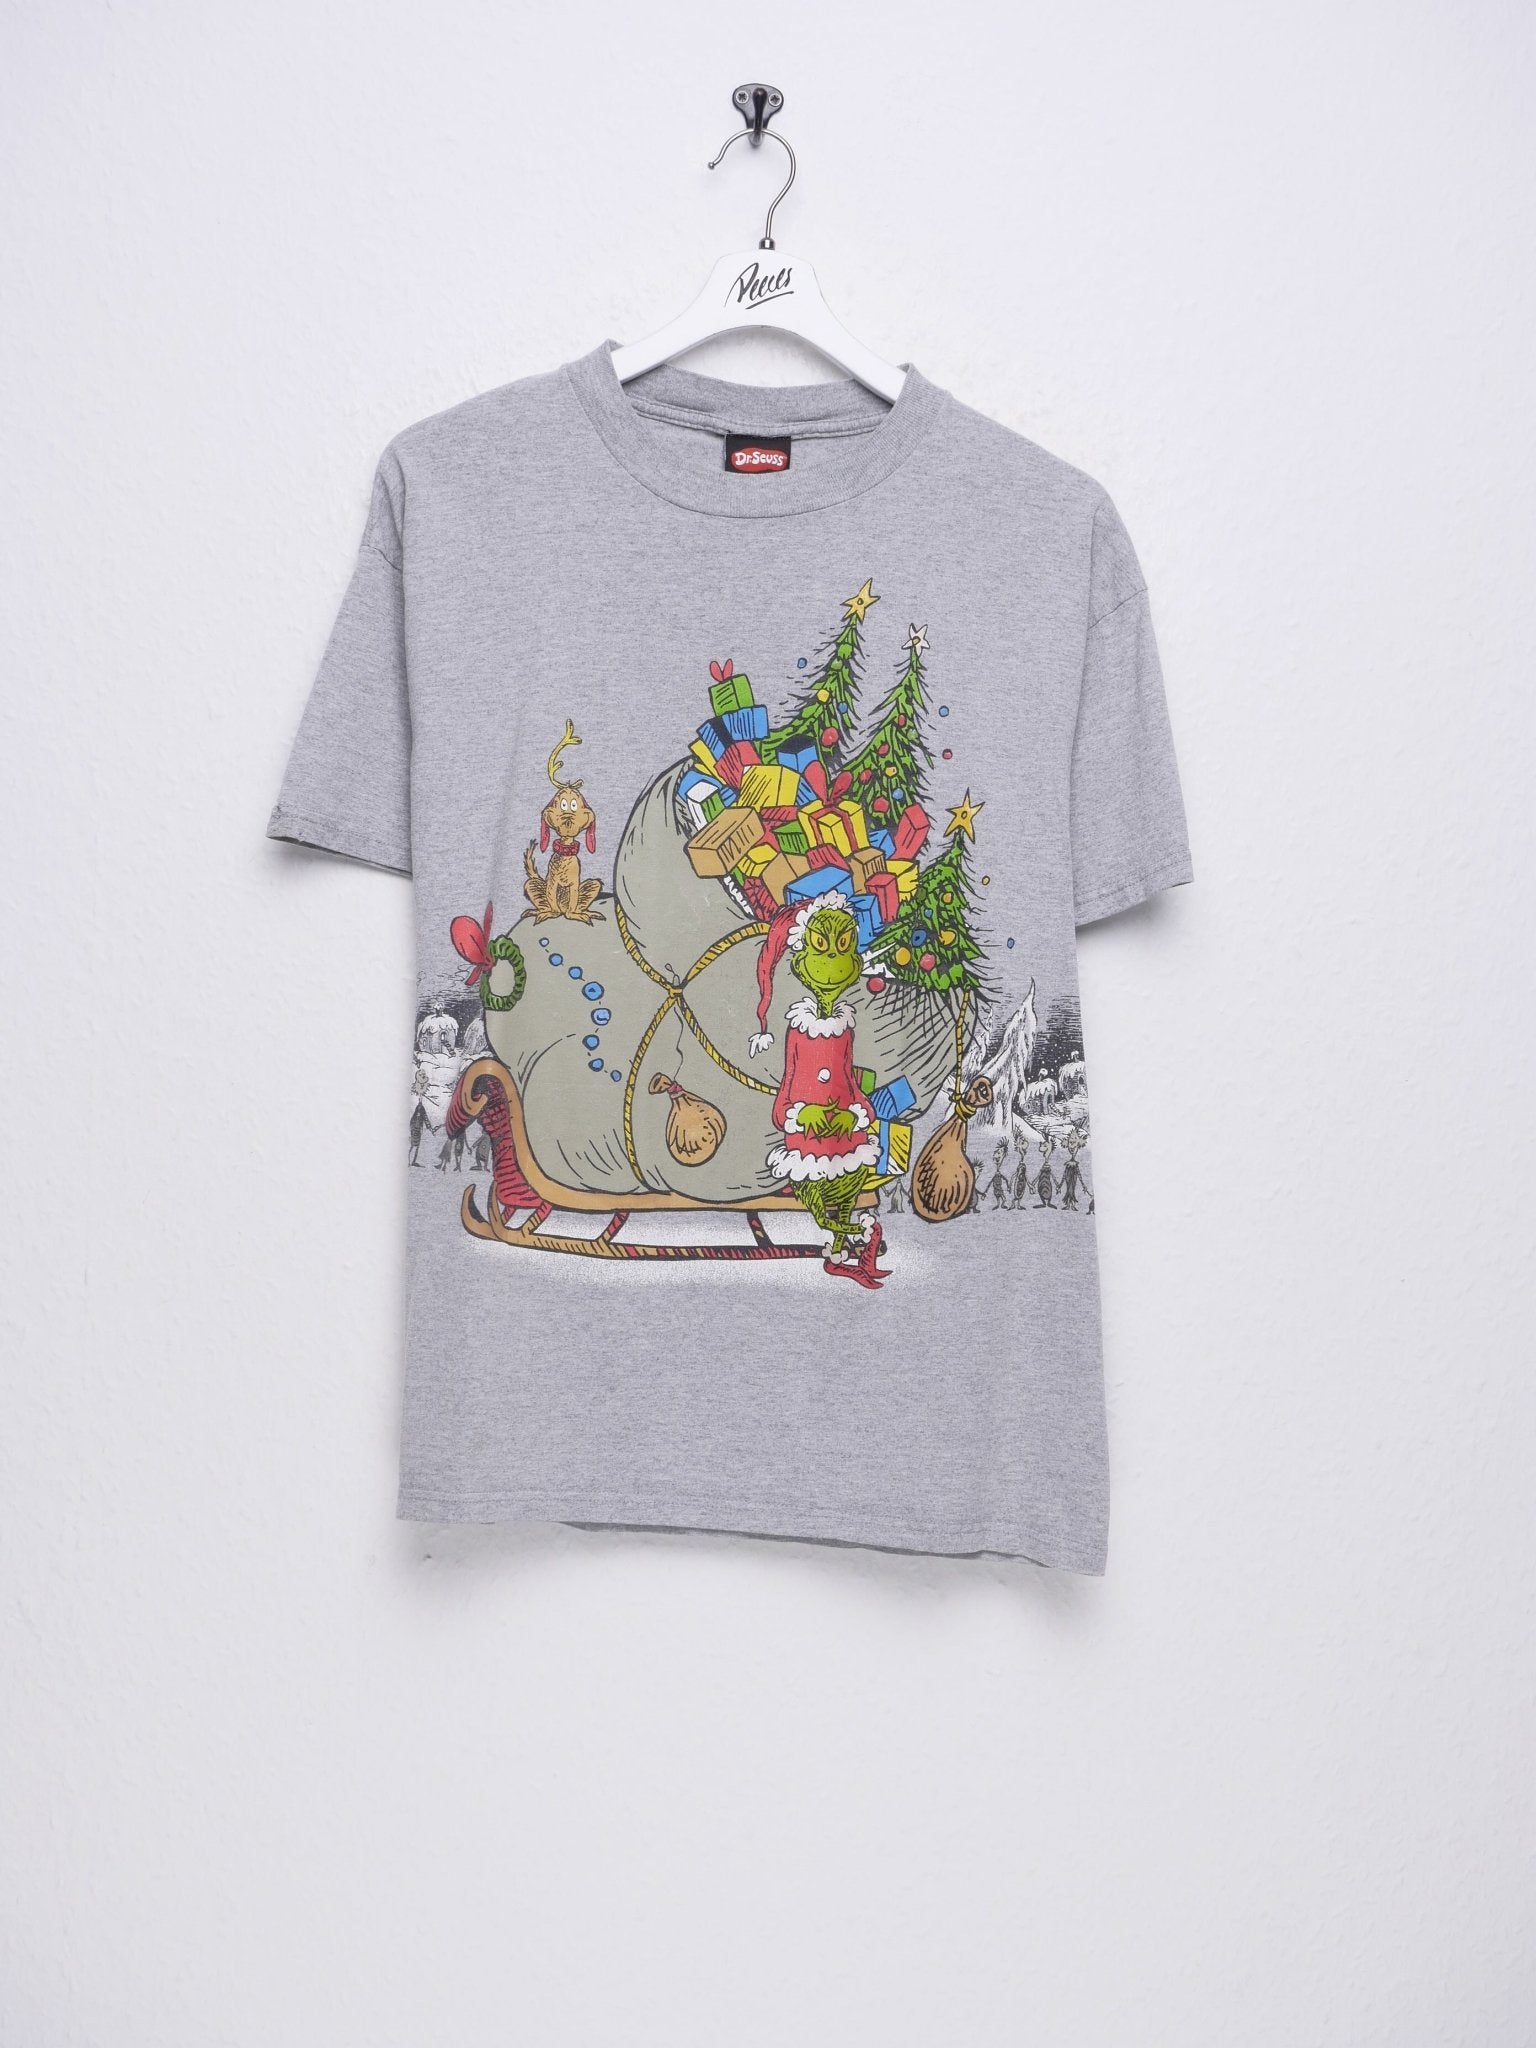 The Grinch Christmas printed Graphic Vintage Shirt - Peeces